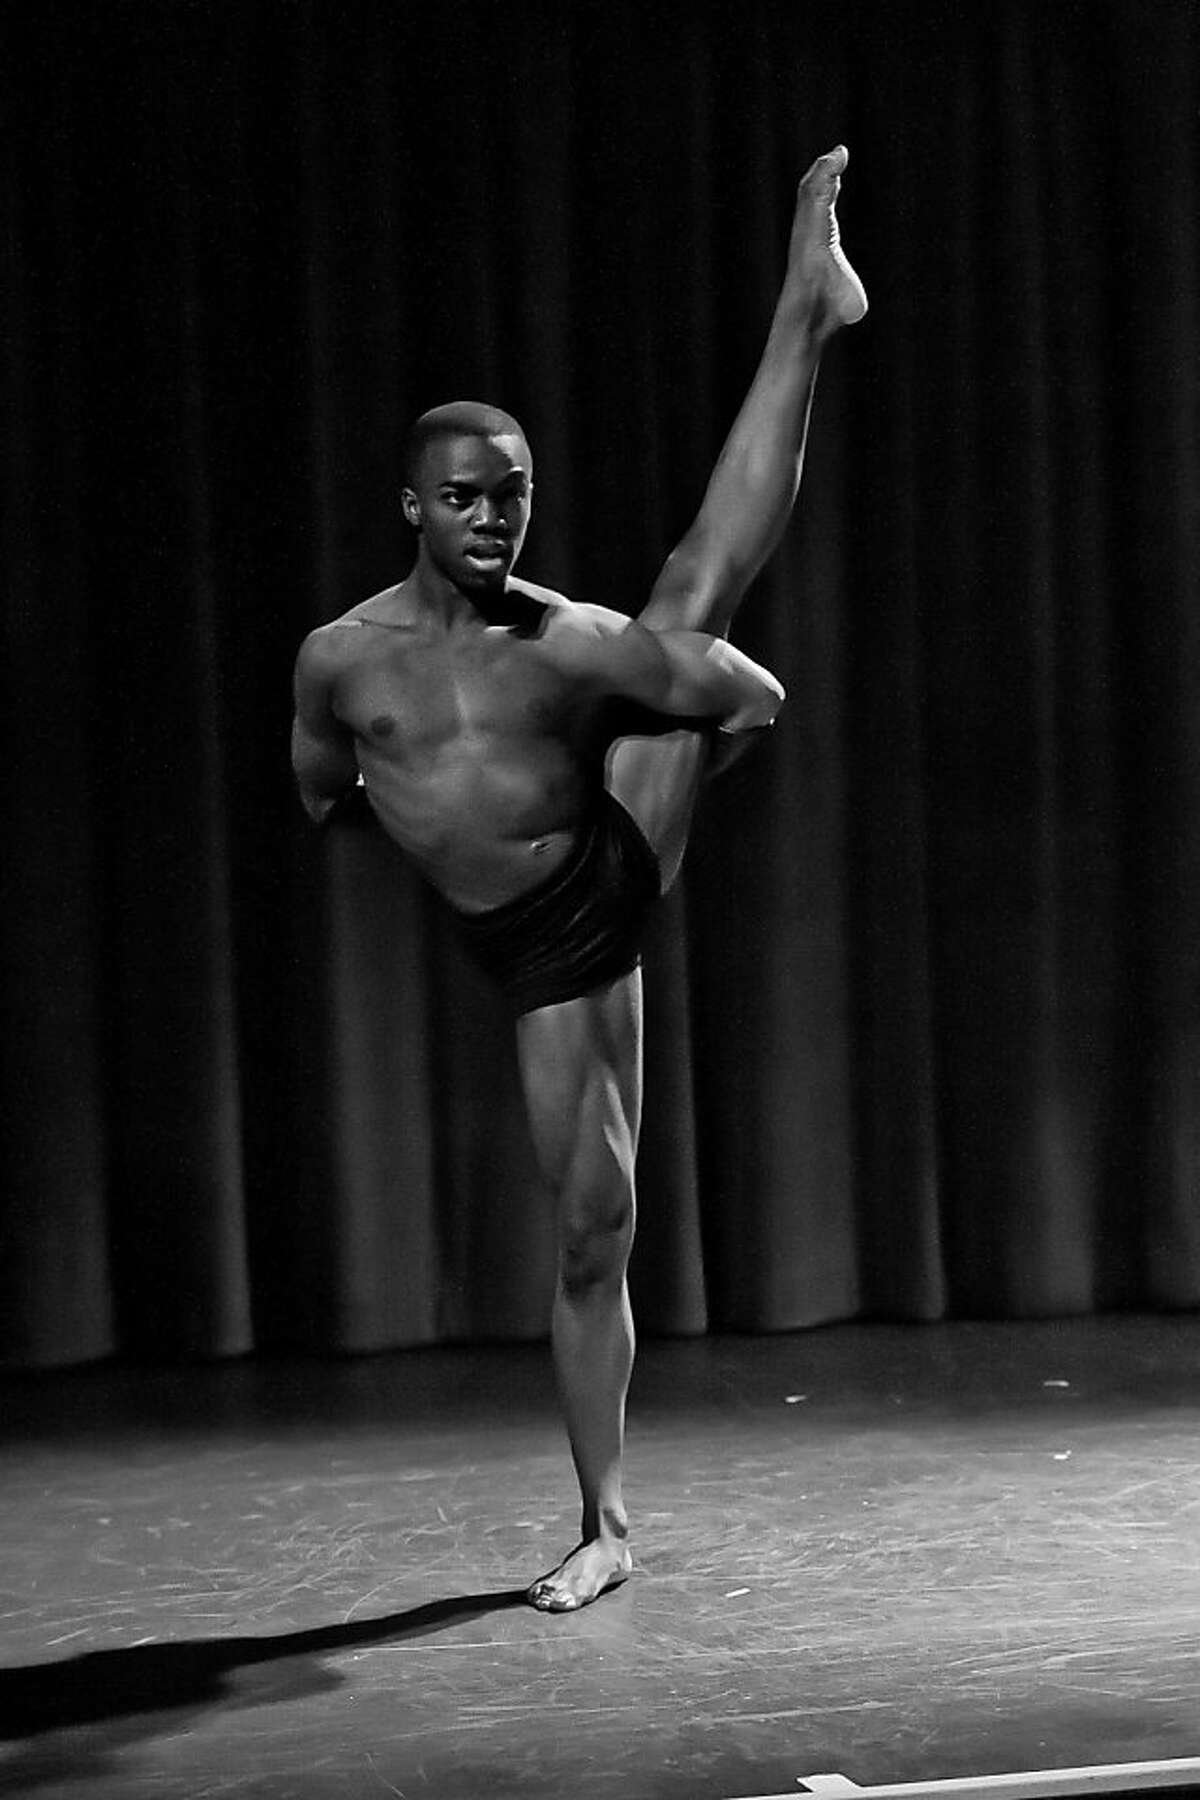 Darius Drooh, winner of the Beach Blanket Babylon Foundation's dance scholarship, rehearses at Club Fugazi in S.F. before the competition.